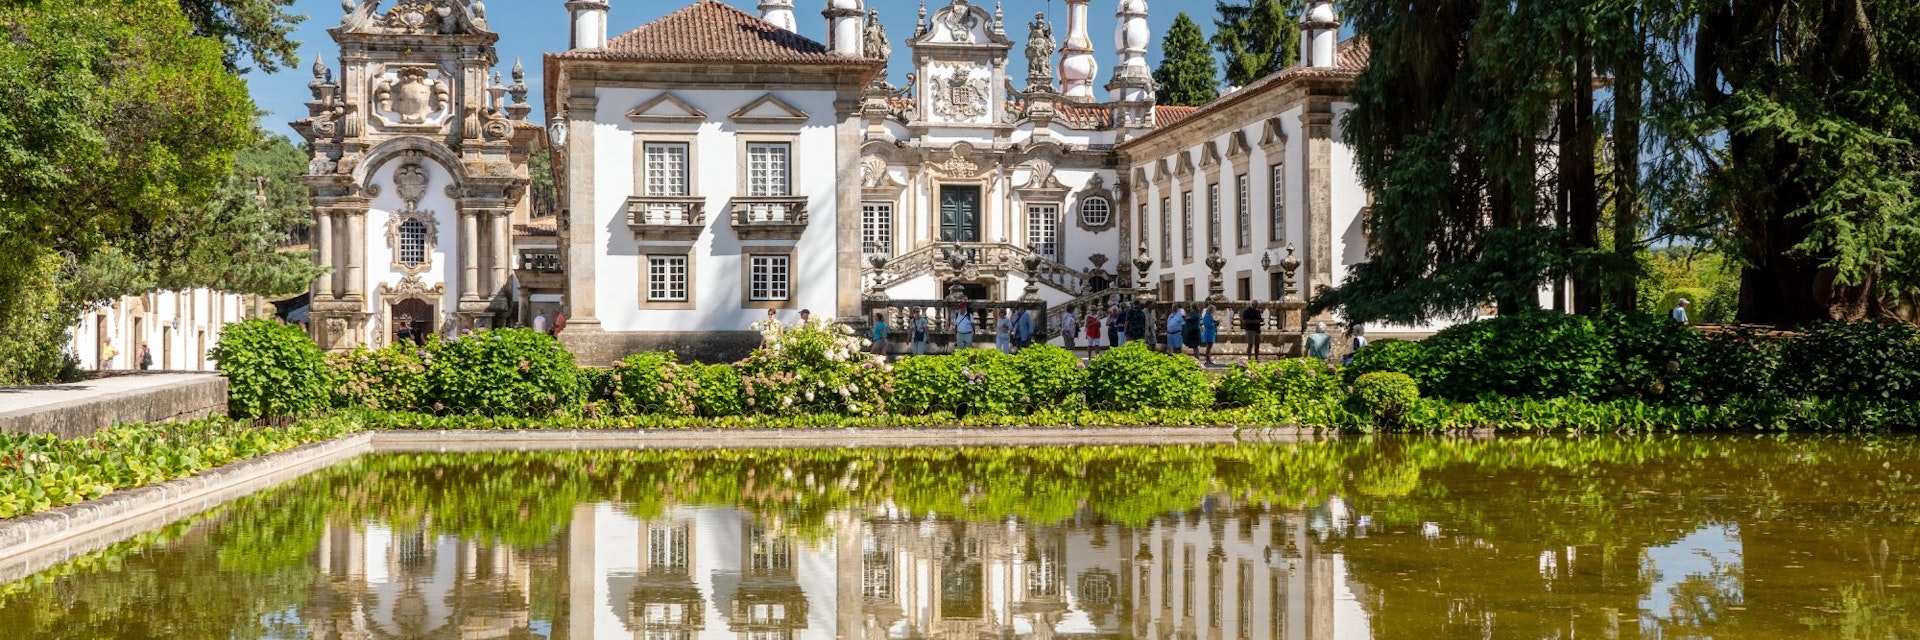 Vila Real, Portugal - 13 August 2019: Reflection of villa in front of entrance of Mateus Palace in Vila Real, Portugal; Shutterstock ID 1541661125; your: Bridget Brown; gl: 65050; netsuite: Online Editorial; full: POI Image Update